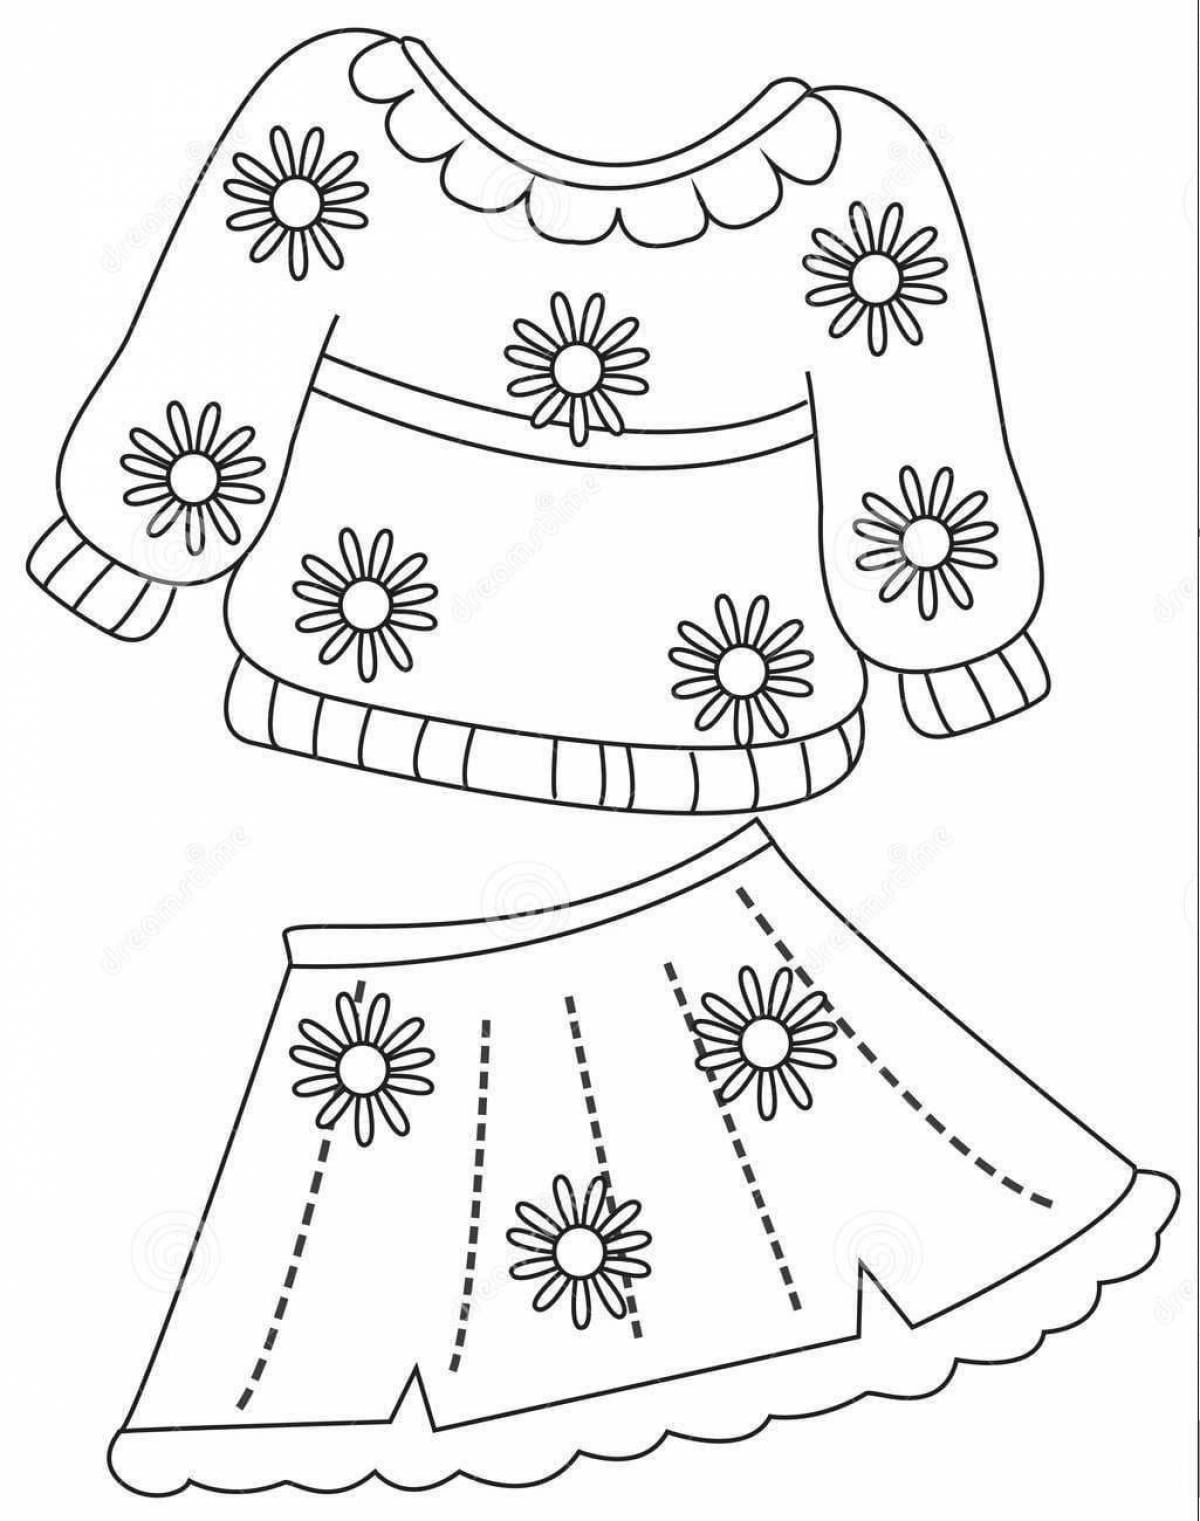 Glittering doll dress coloring book for children 4-5 years old